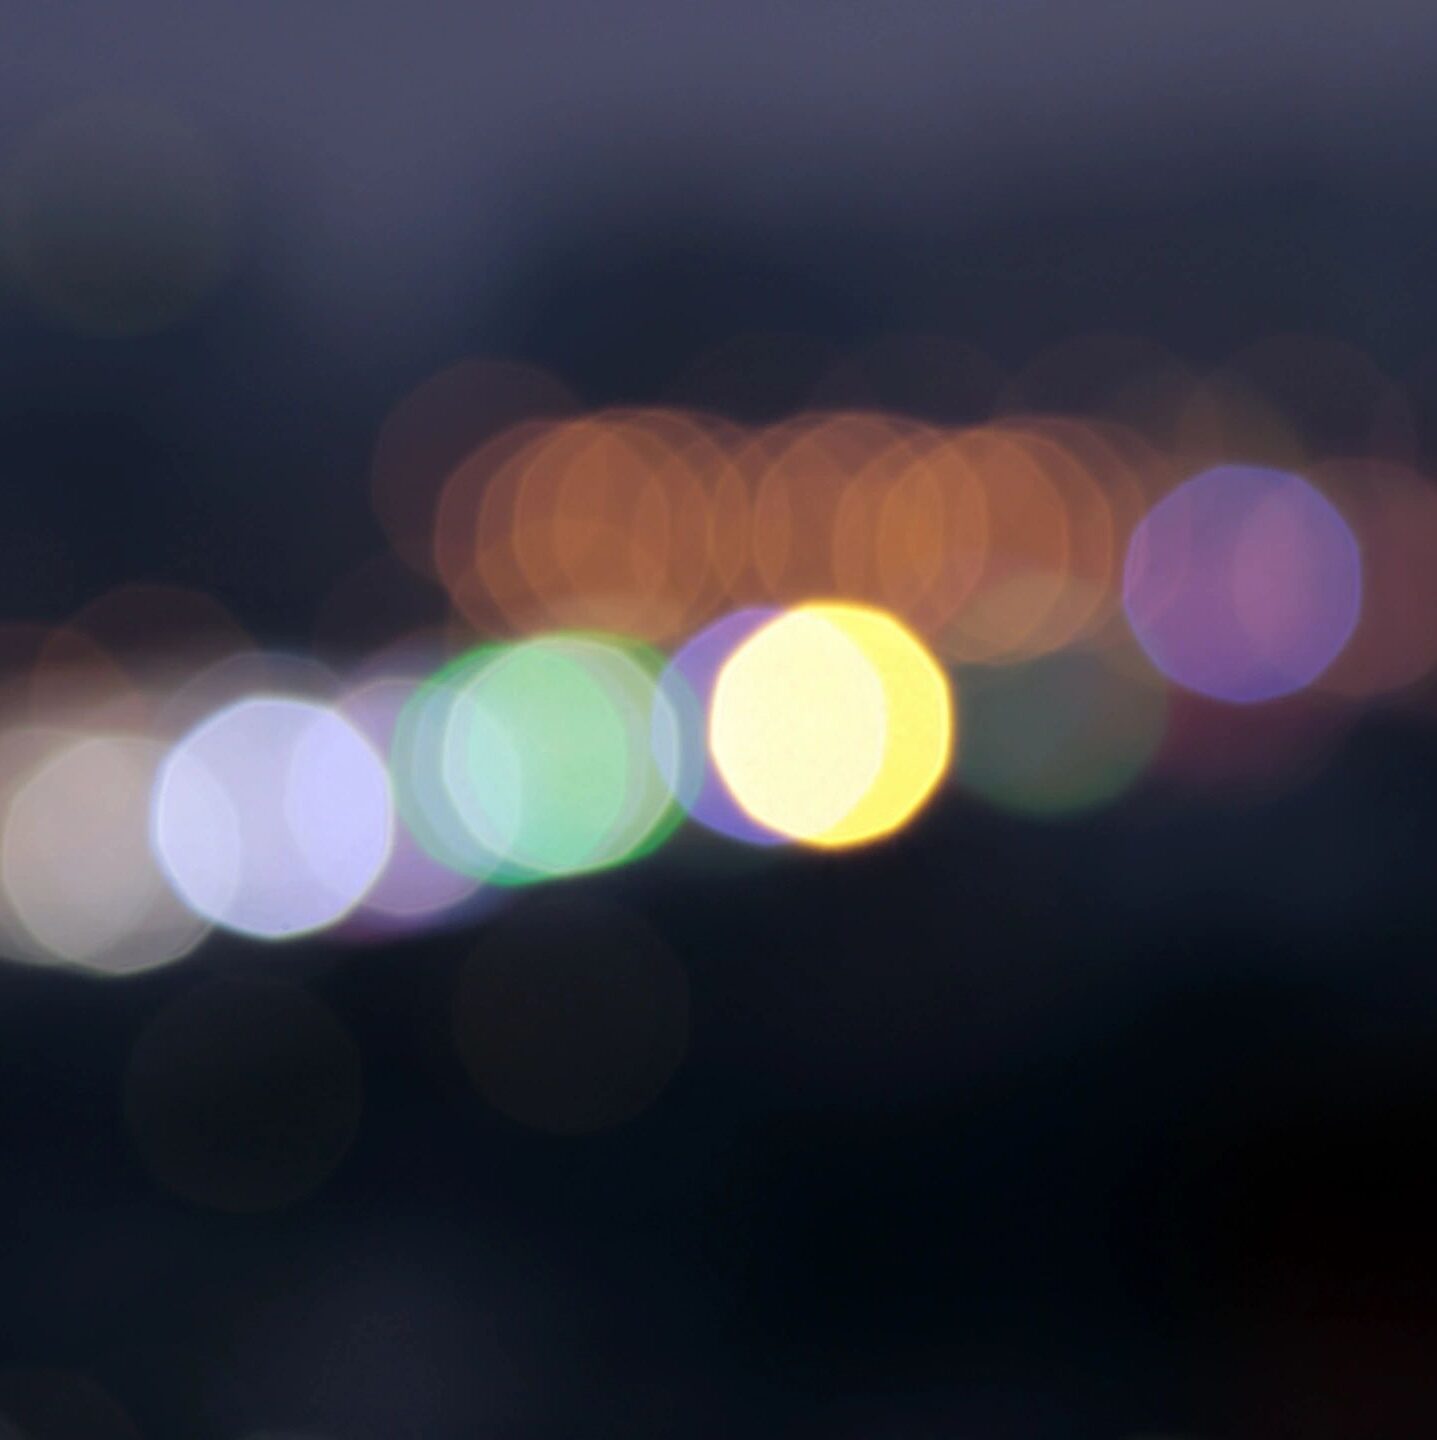 Image is of lights shining in the distance. Clicking on the image will lead to the Sights page.